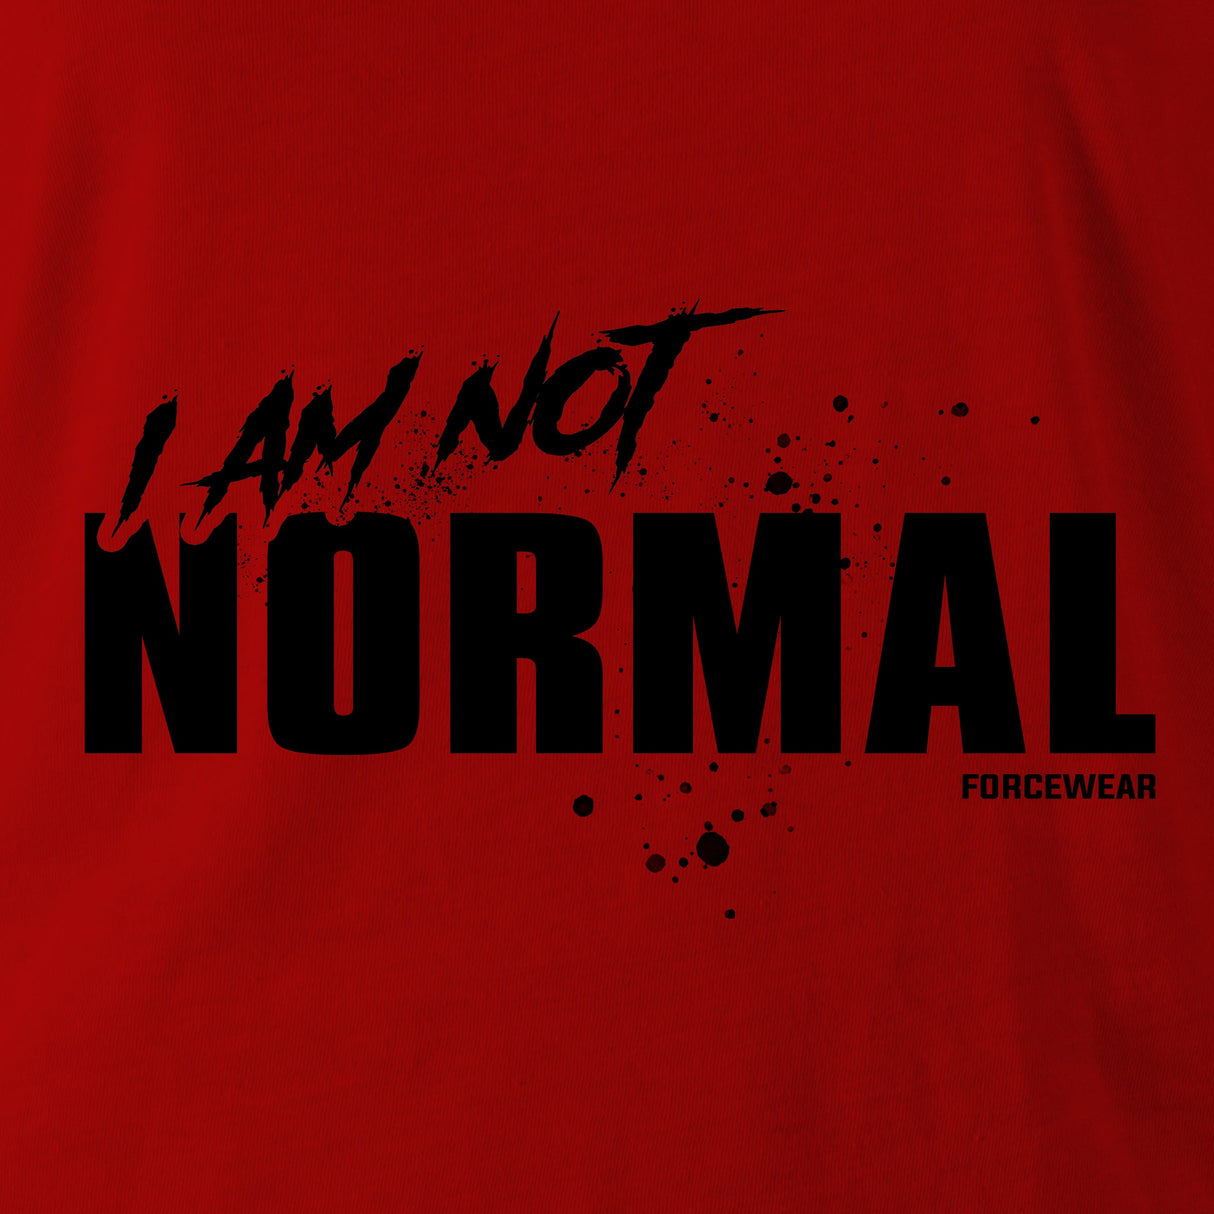 I AM NOT NORMAL HOODIE - Force Wear HQ